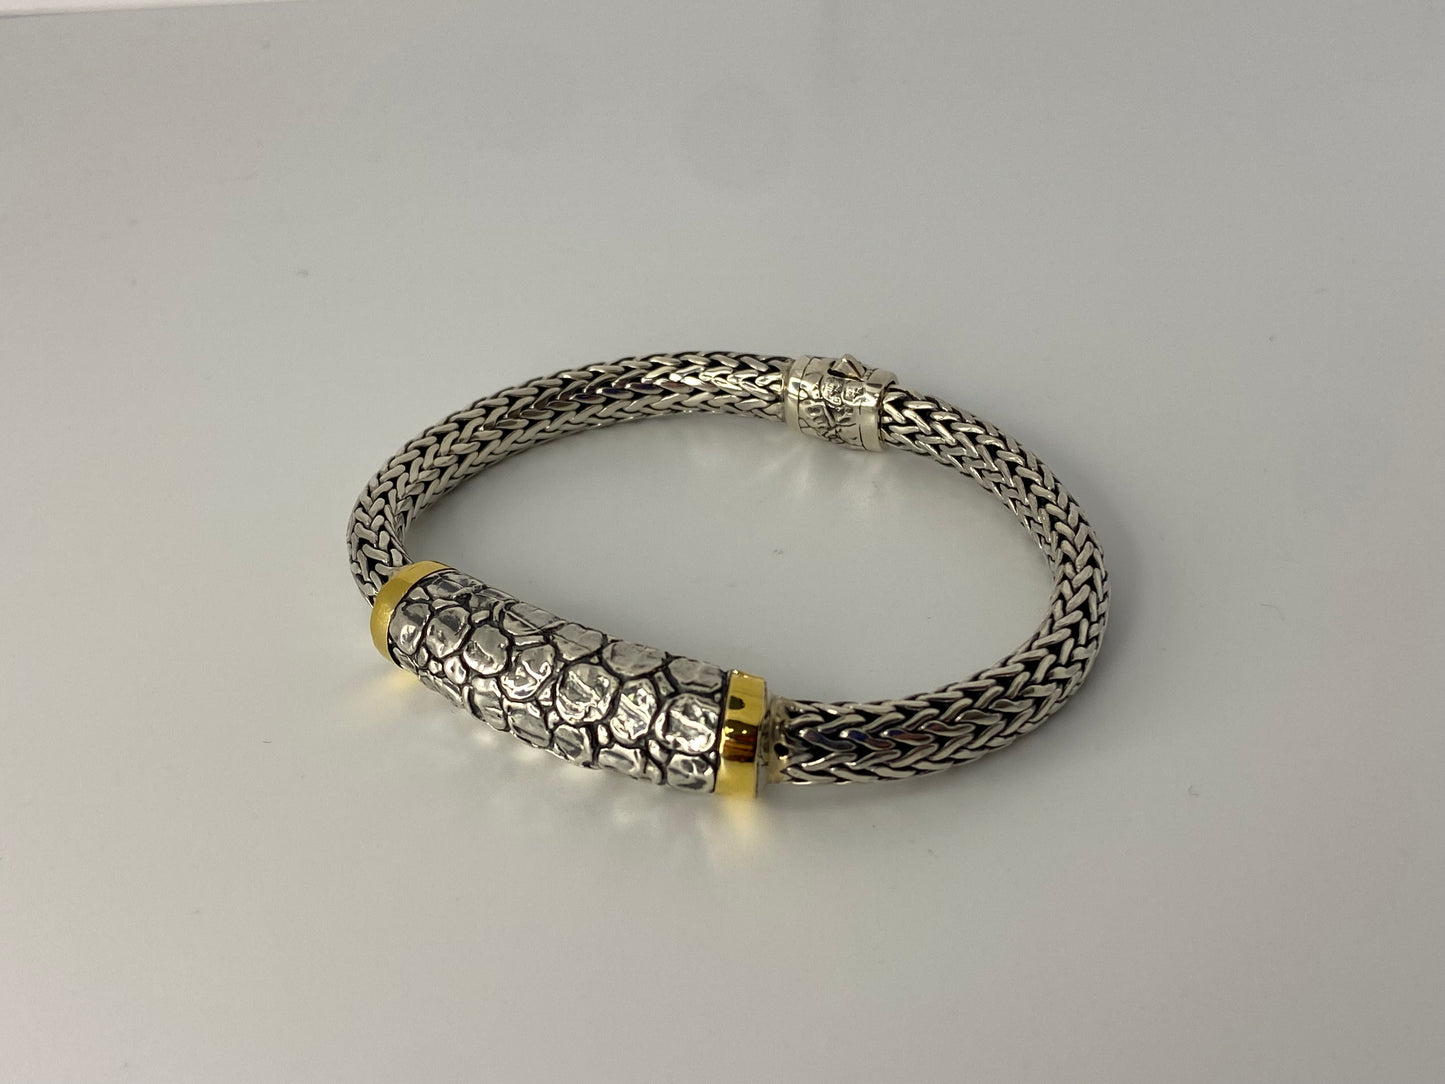 Gold and Silver Bracelet with Crocodile Motif